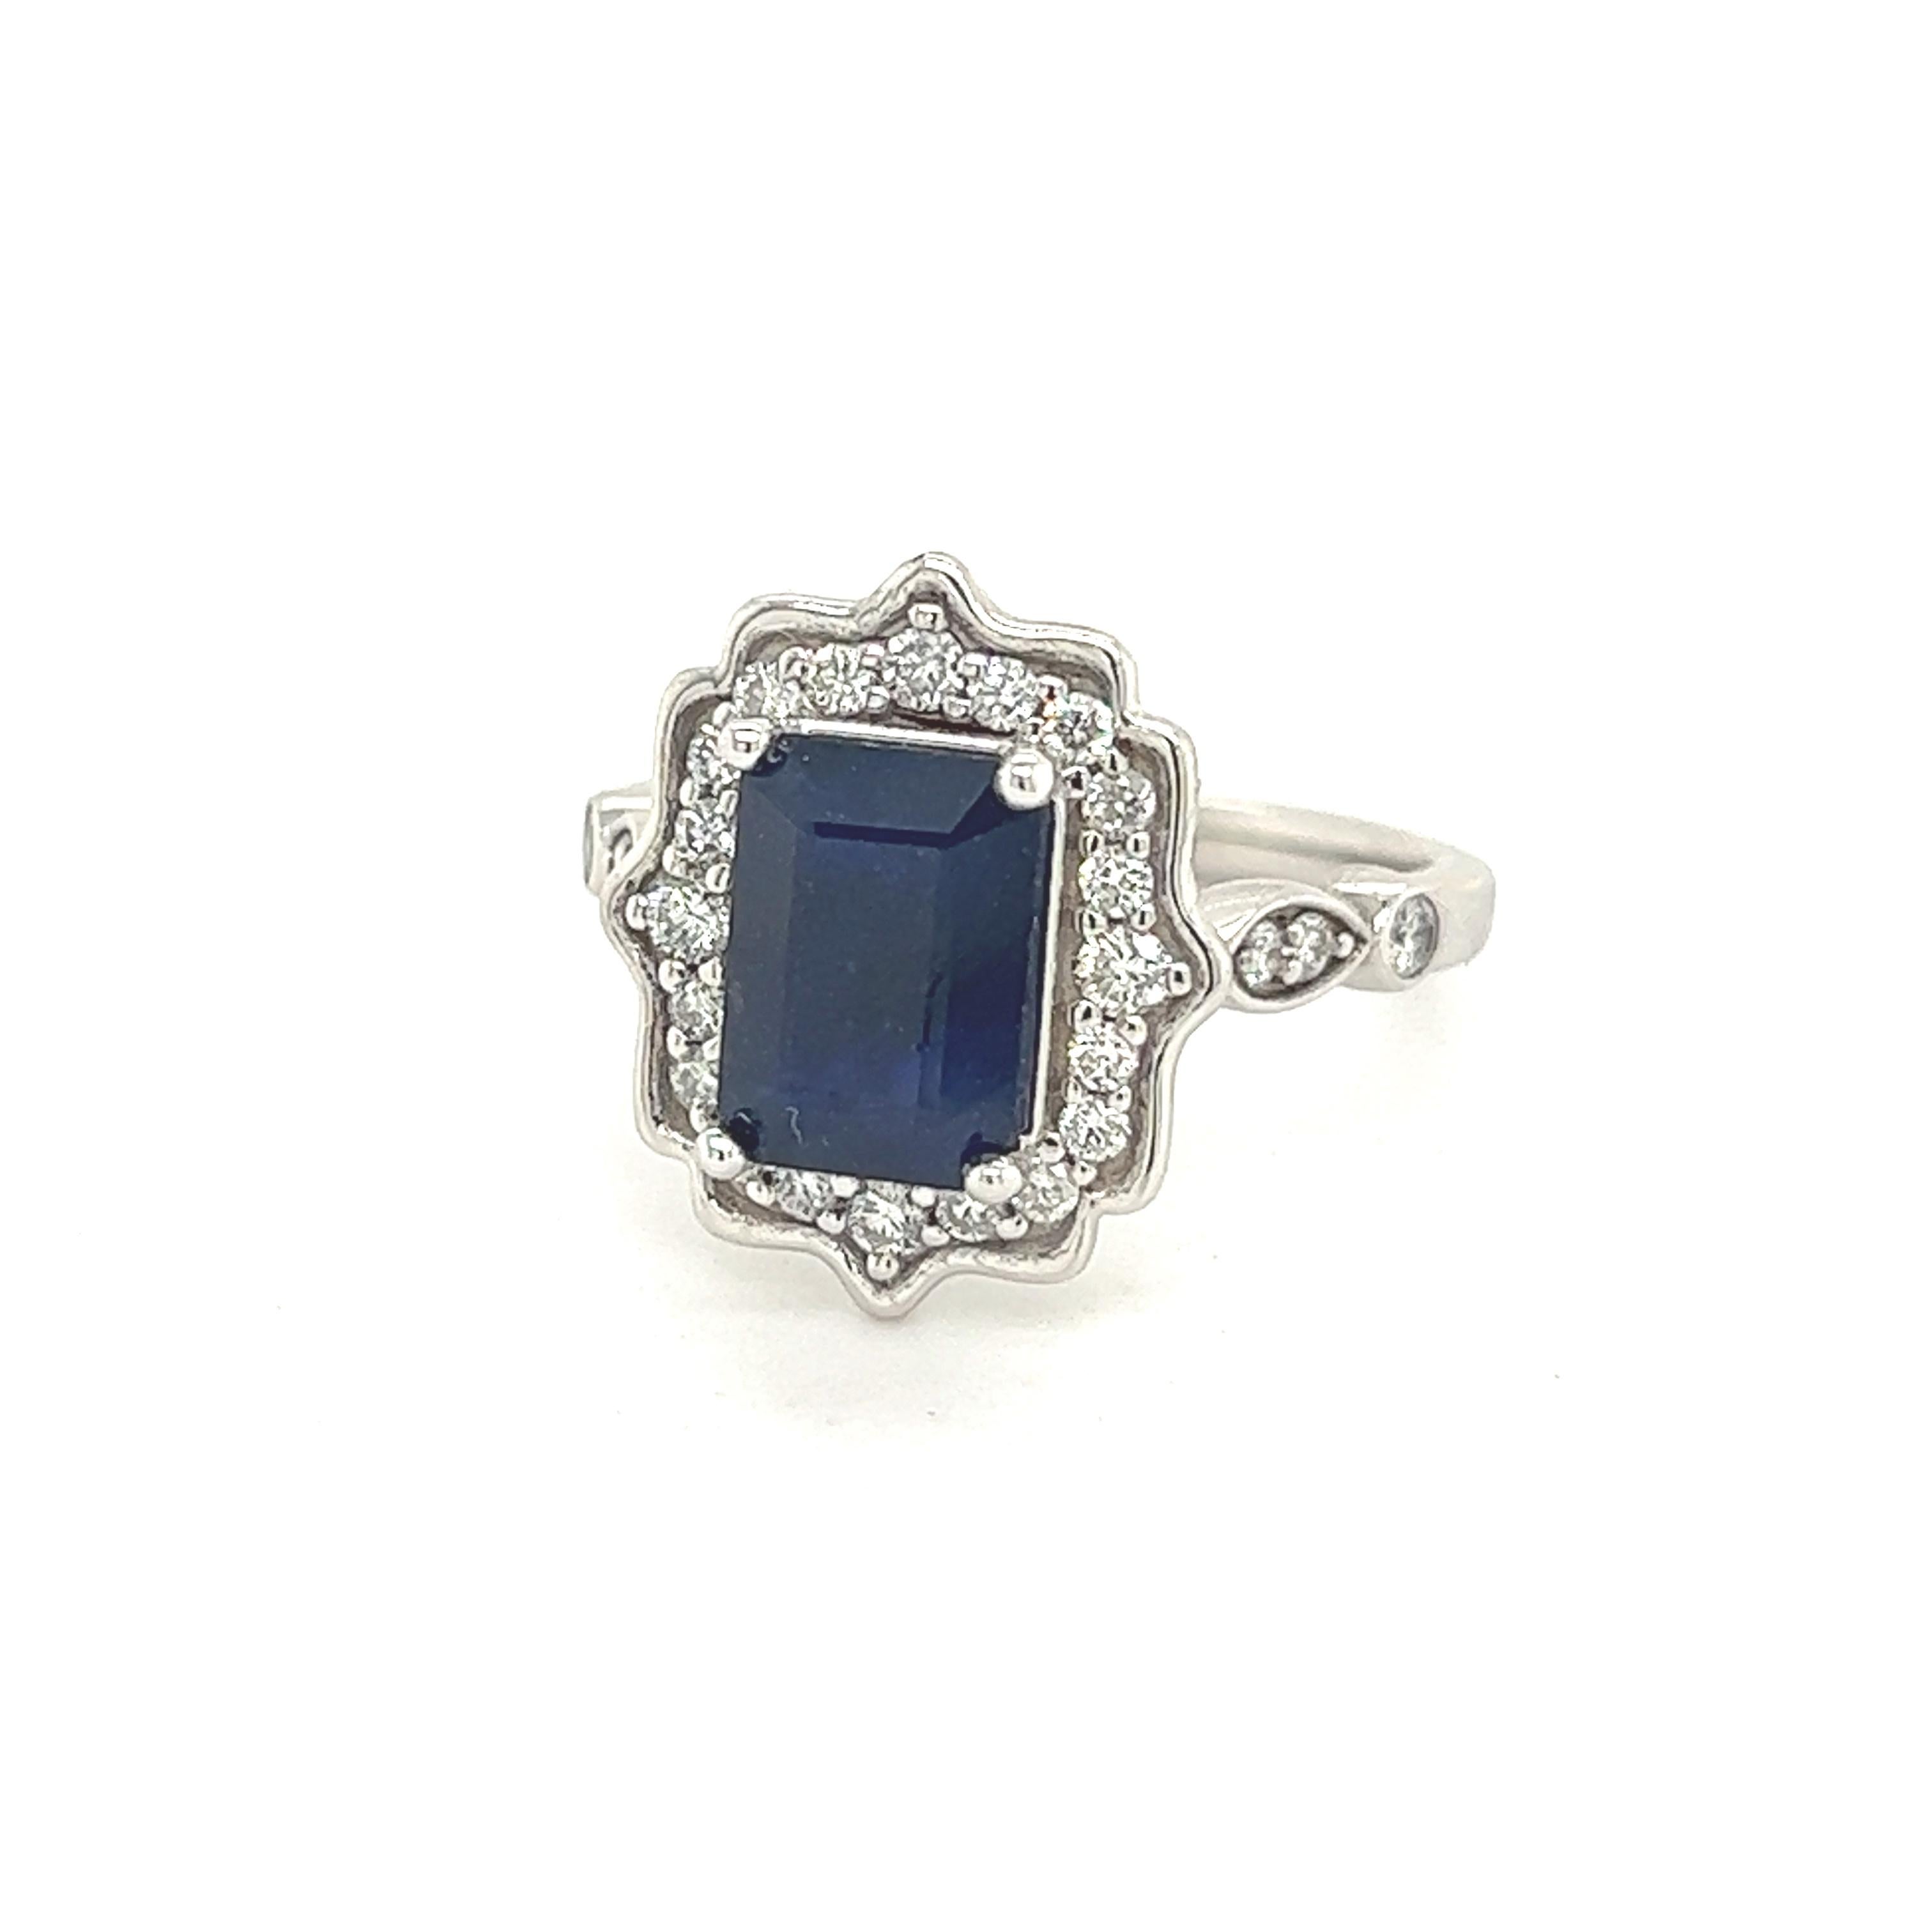 Natural Sapphire Diamond Ring 6.5 14k White Gold 3.51 TCW Certified For Sale 2